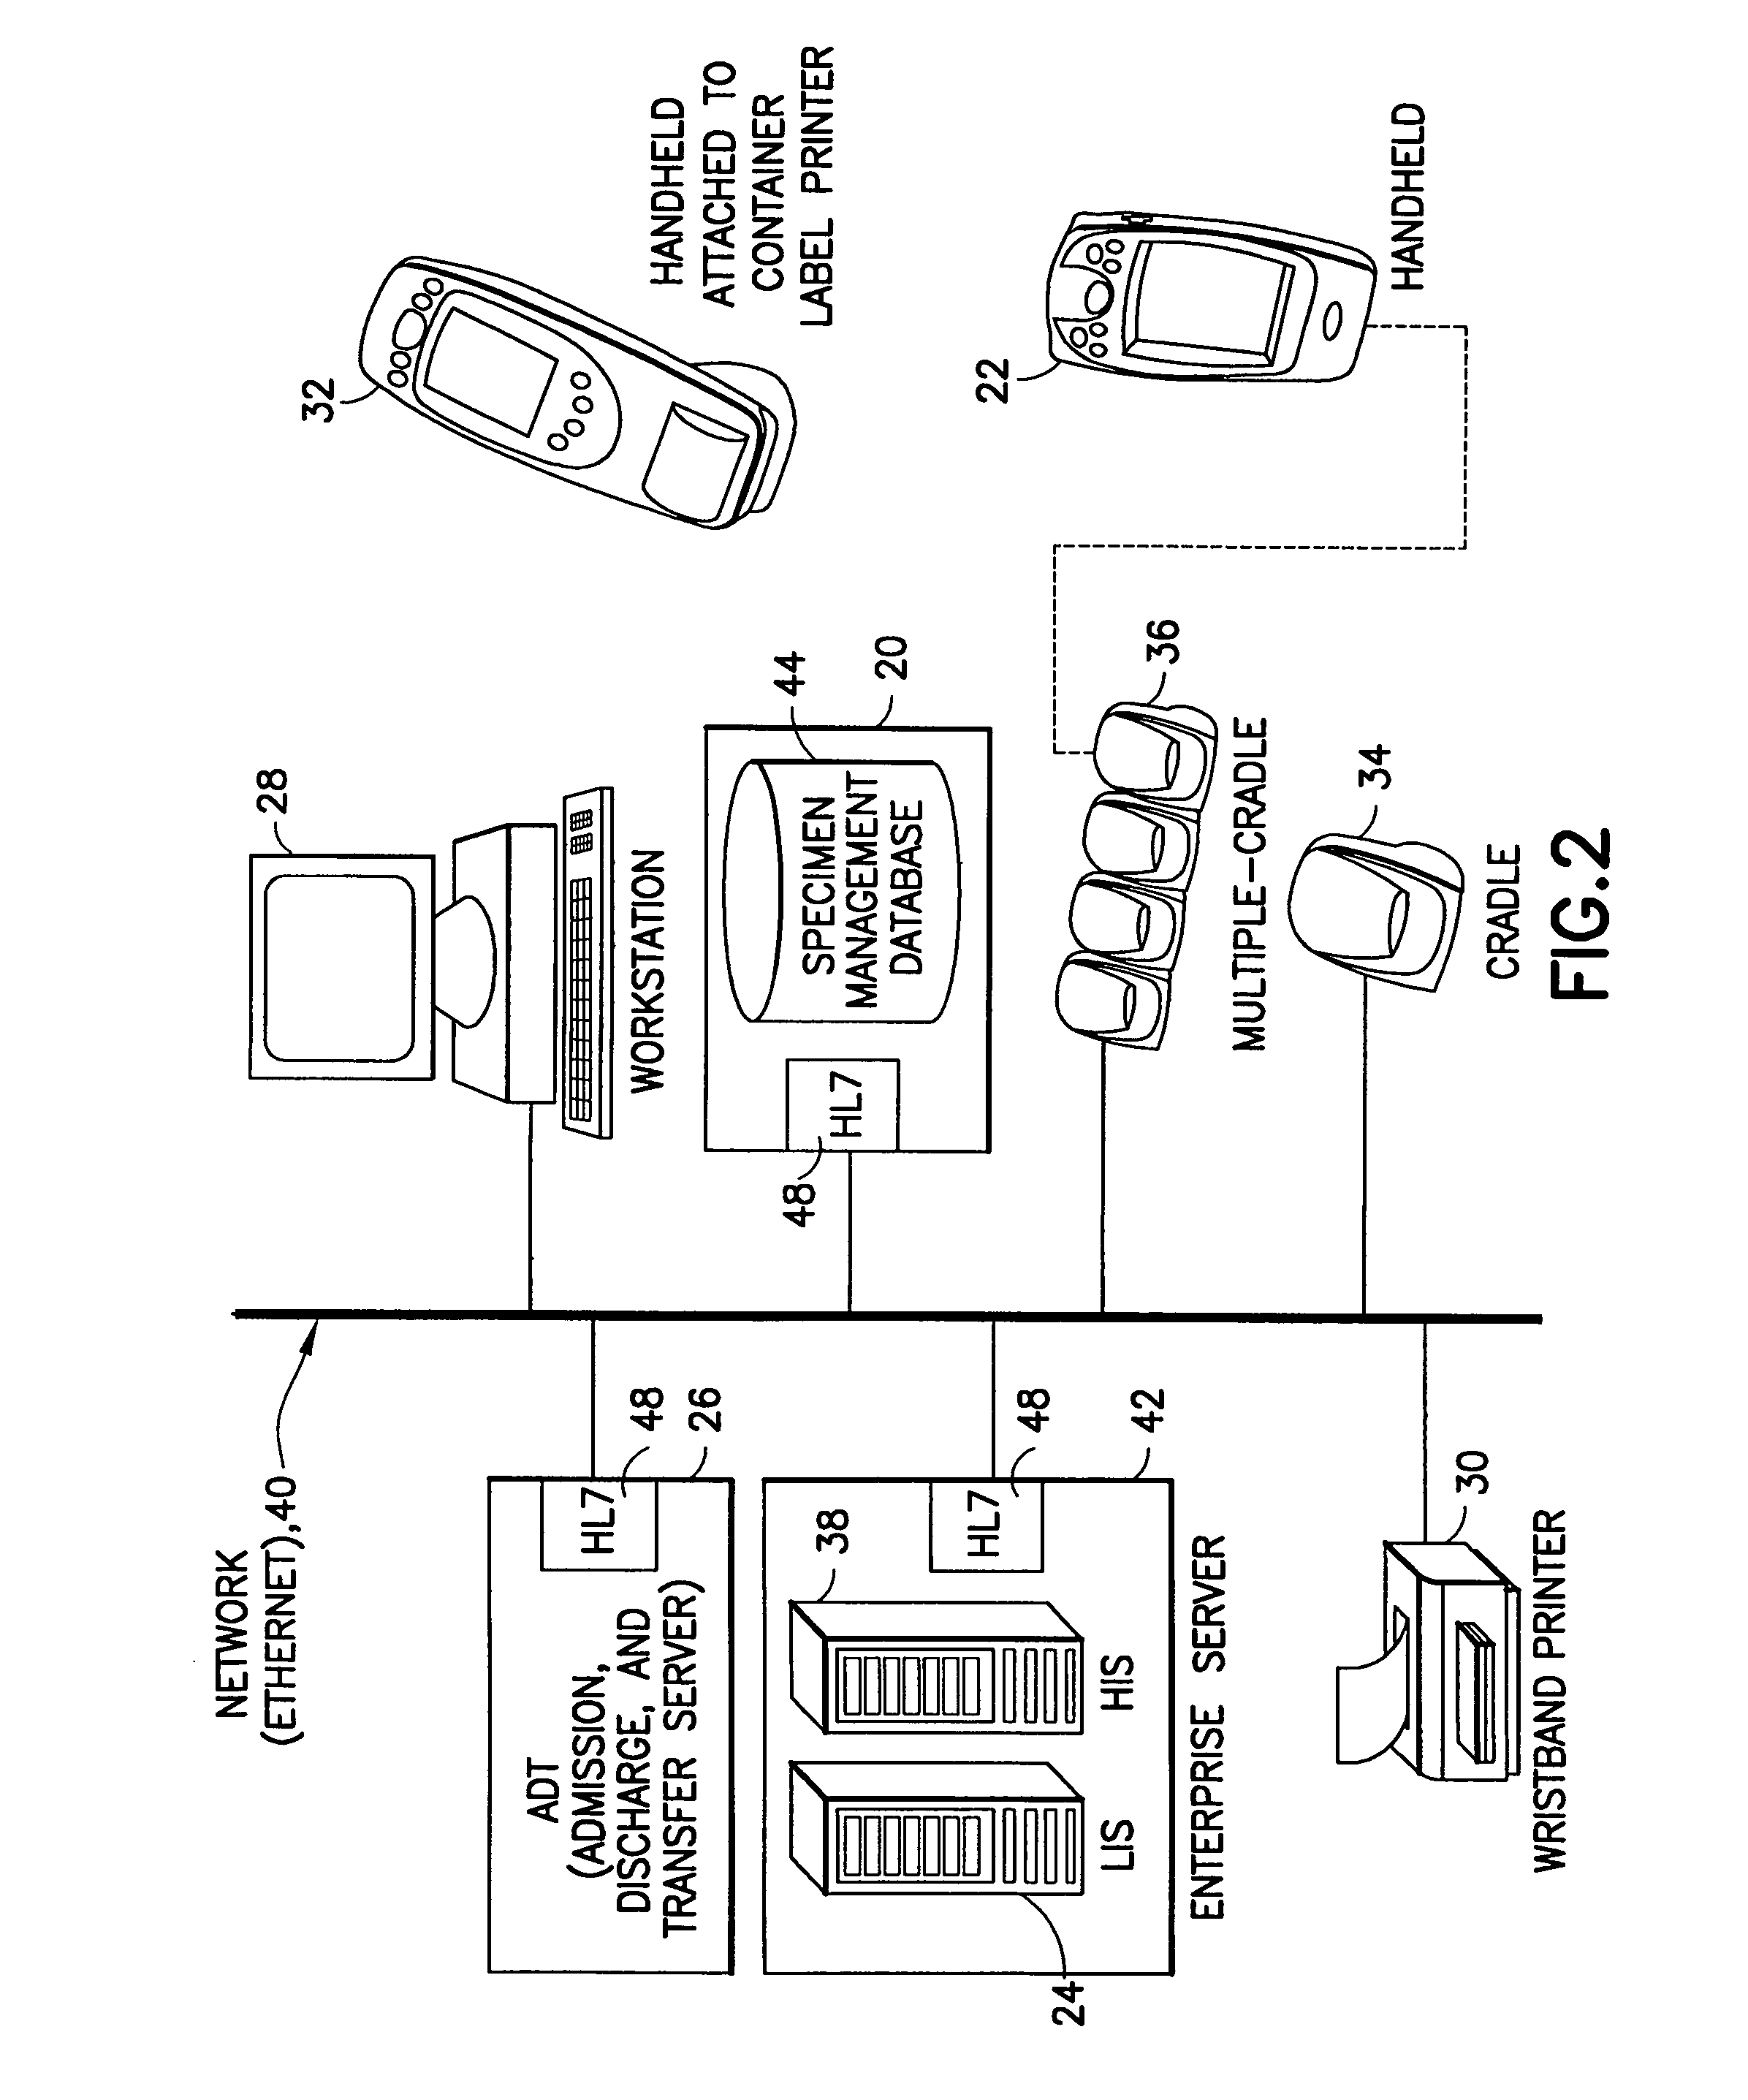 System and apparatus for efficiently utilizing network capacity in a healthcare setting